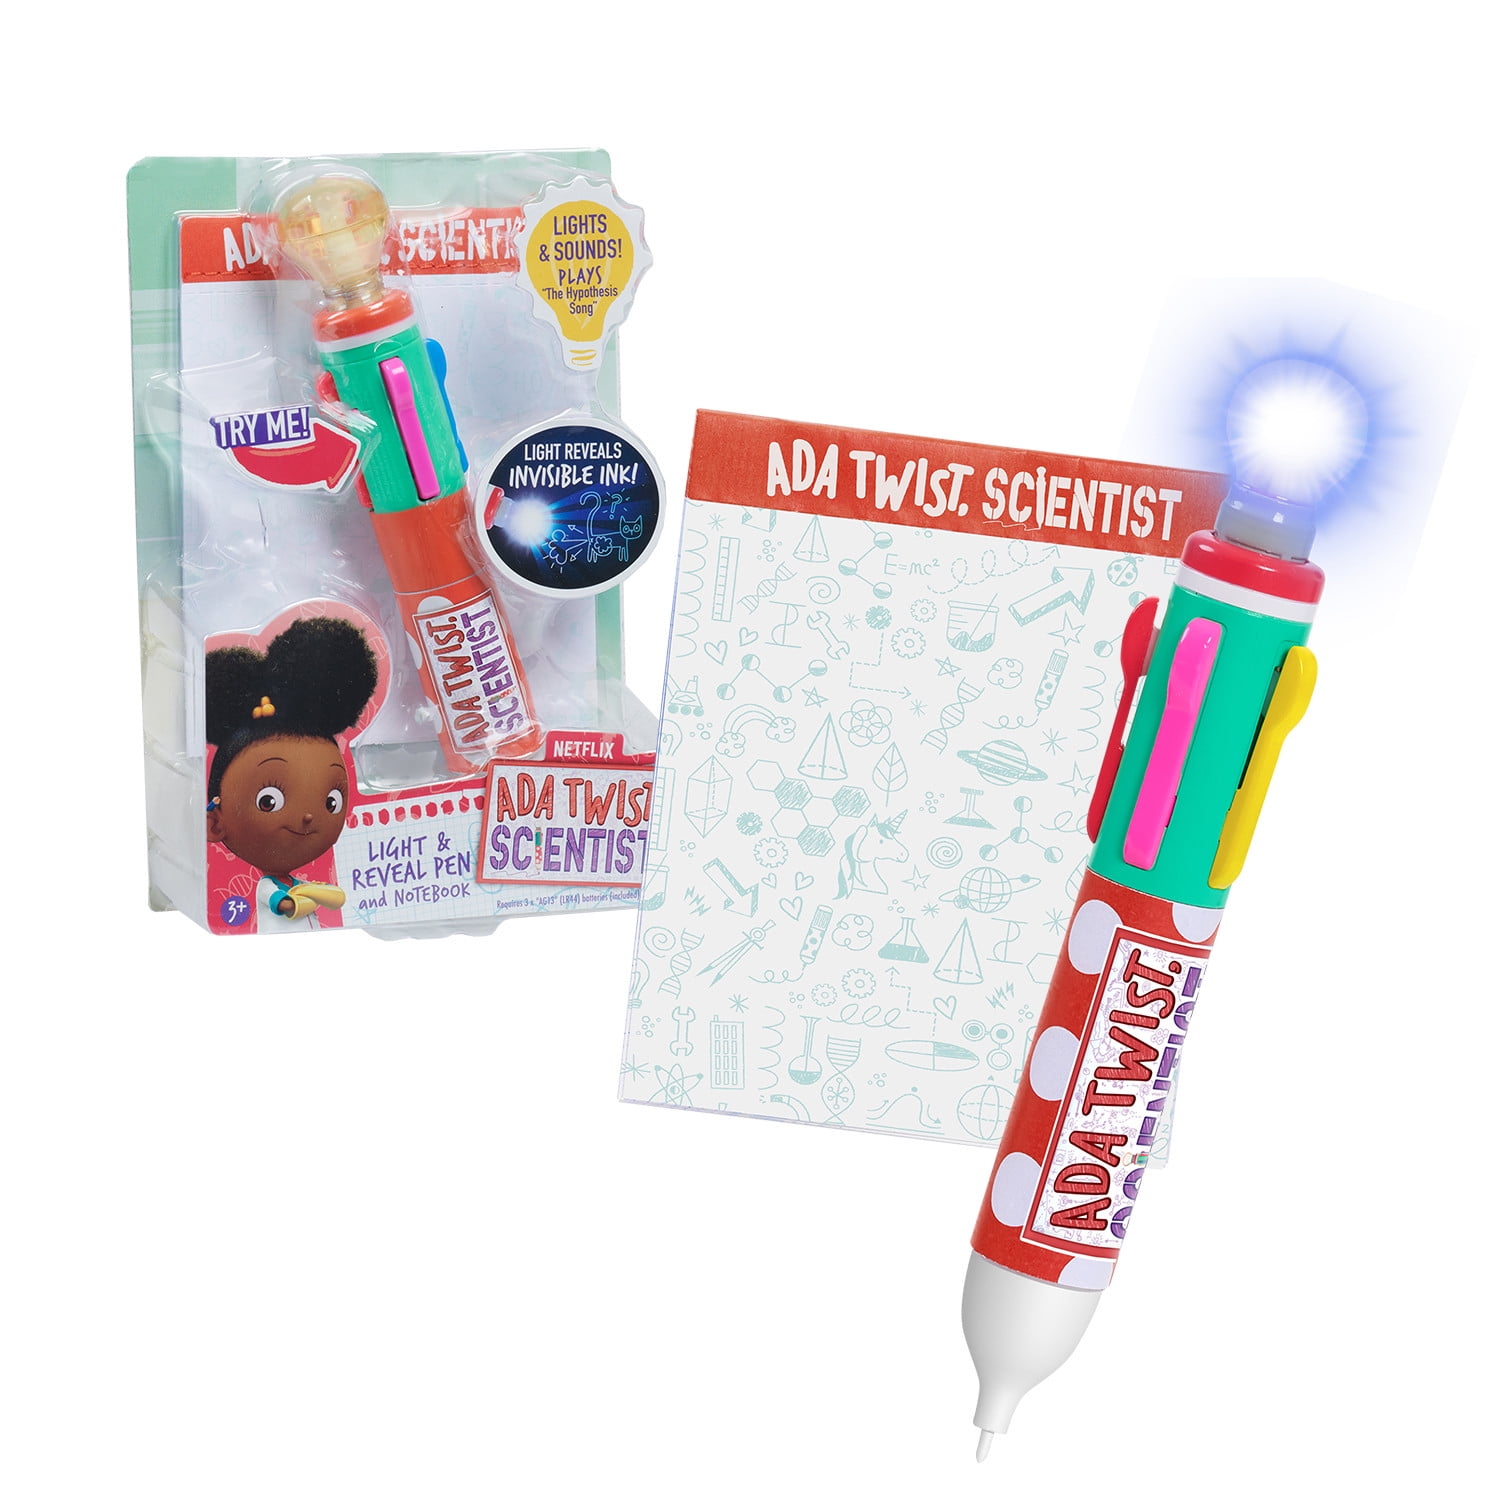 Ada Twist, Scientist Light and Reveal Pen with Invisible Ink, Lights Up and Plays the "The Hypothesis Song", Accessory for Scientist Dress-Up Set,  Kids Toys for Ages 3 Up, Gifts and Presents